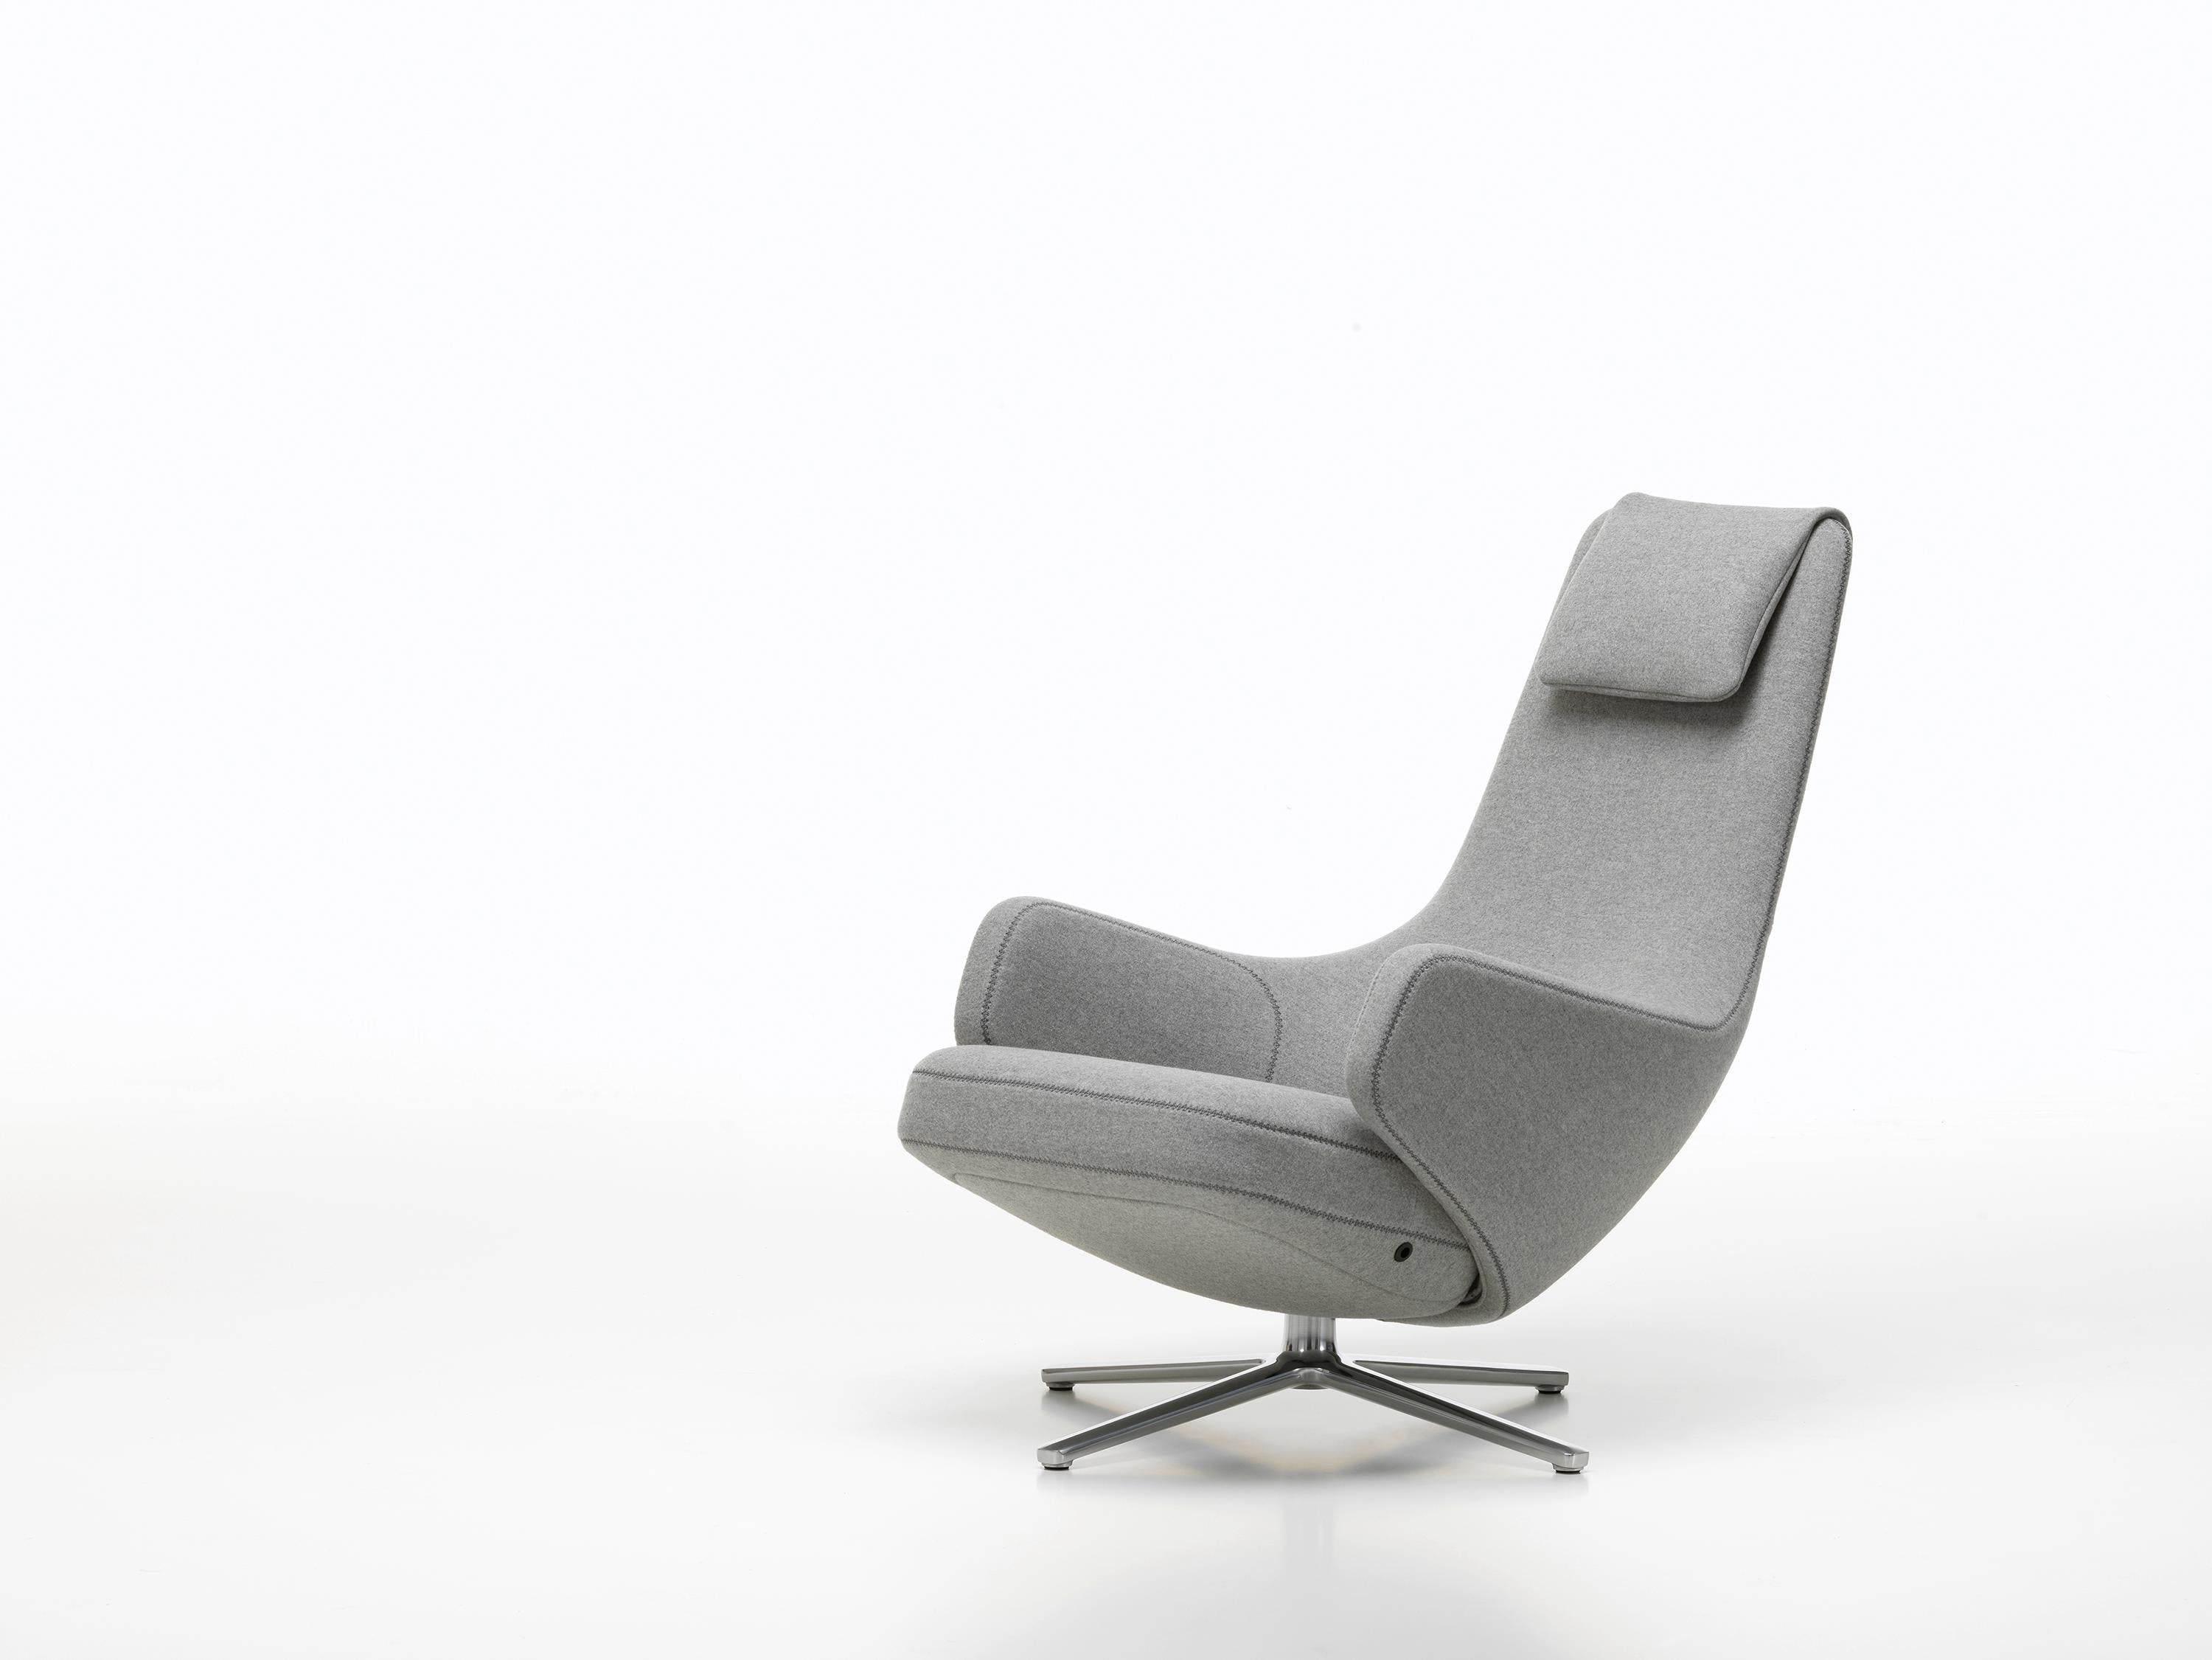 Upholstery Vitra Repos Lounge Chair in Pebble Grey Cosy by Antonio Citterio For Sale